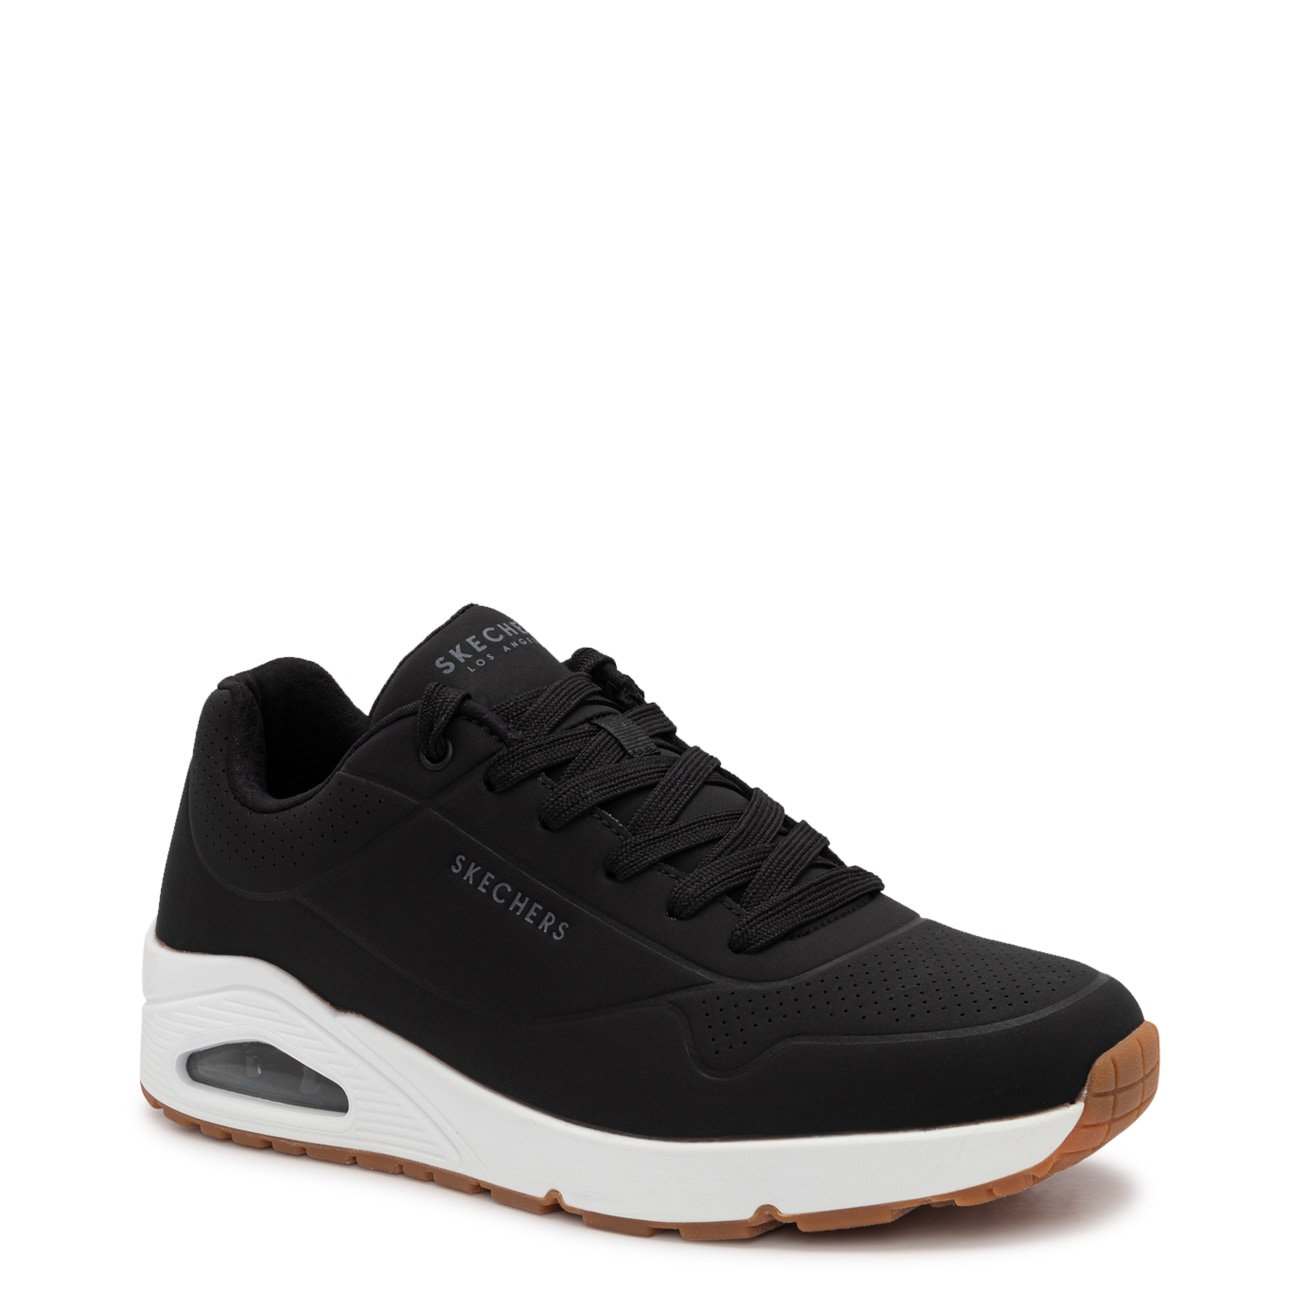 Men's Uno Stand On Air Sneaker